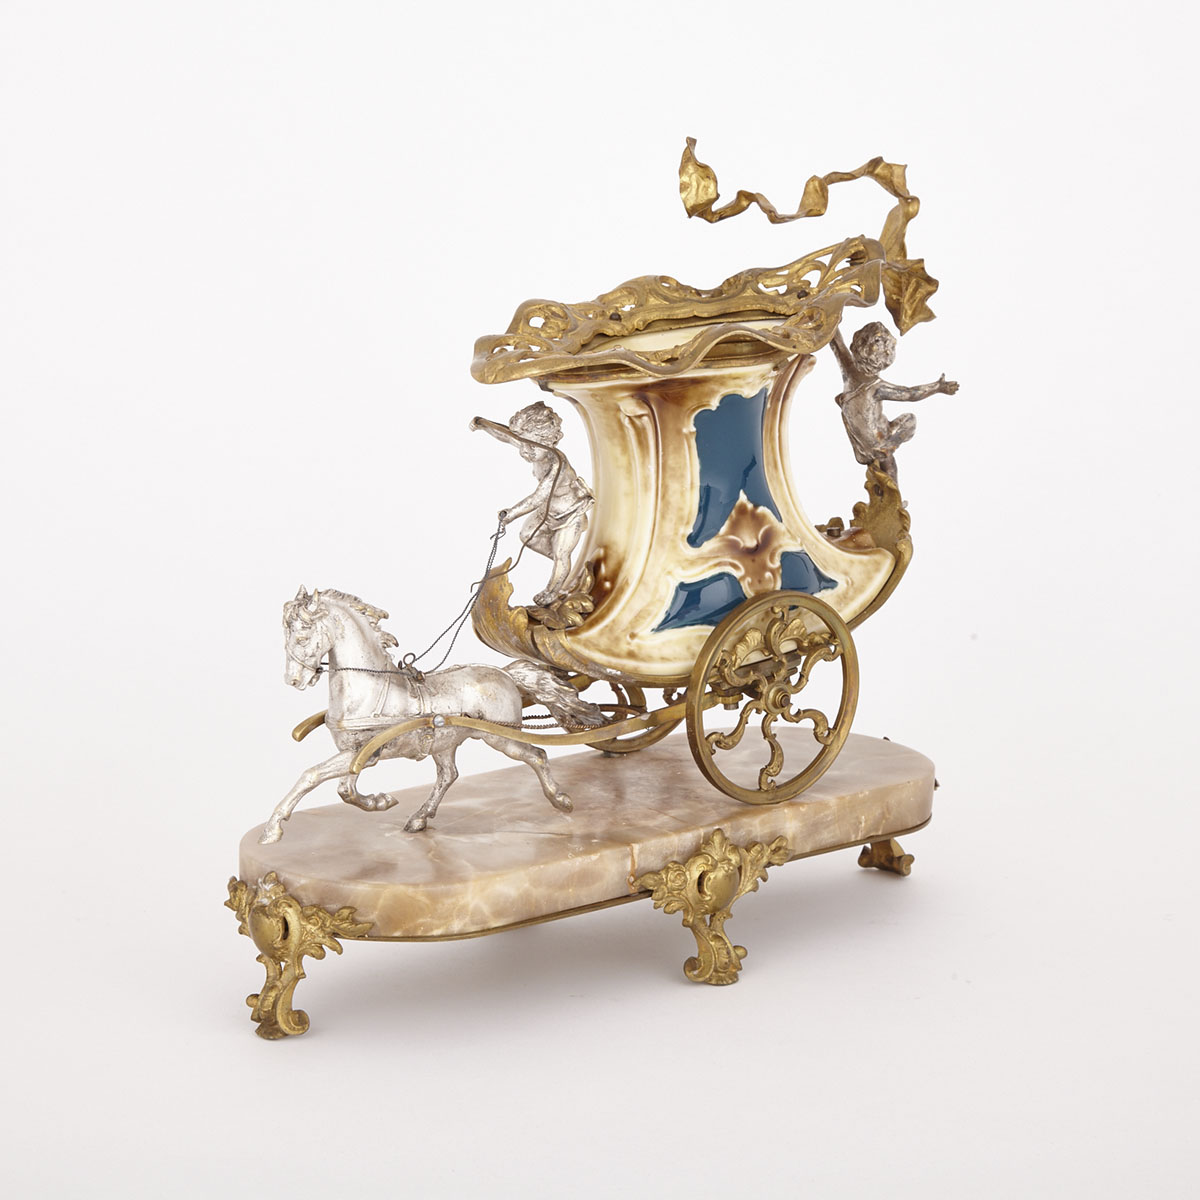 Austrian Silvered and Gilt Bronze Mounted Pottery Carriage Form Centerpiece Vase, early 20th century